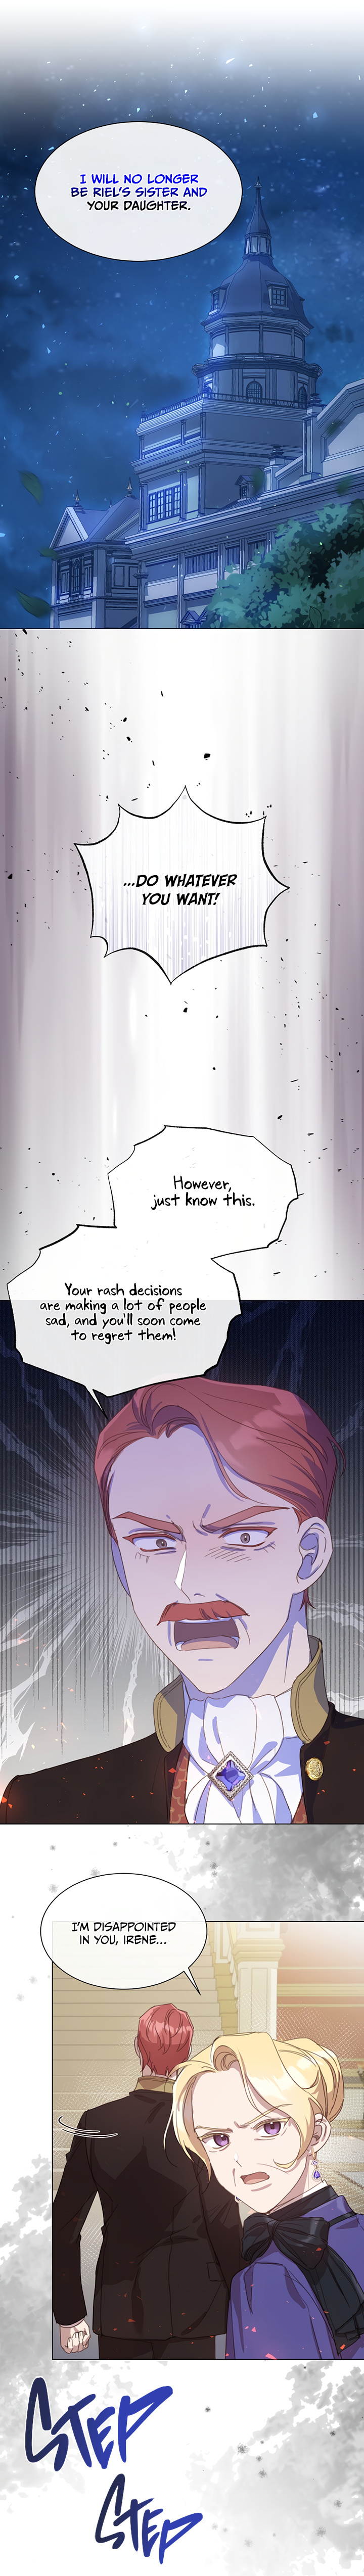 The Kind Older Sister Is No More - Page 2